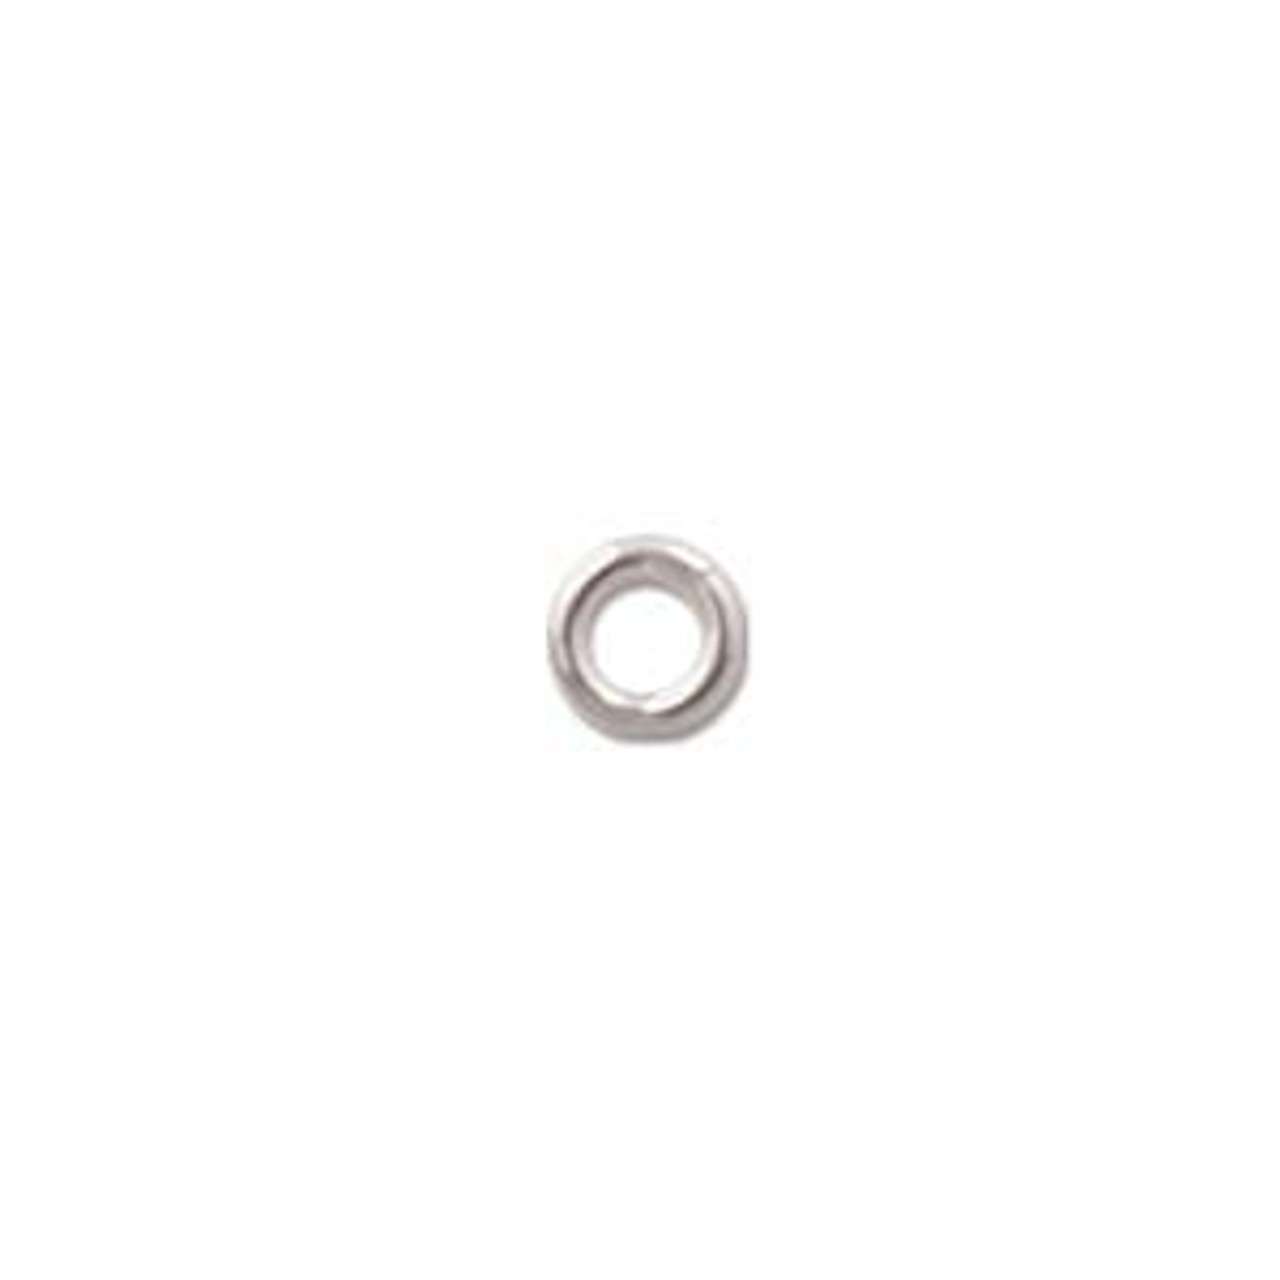 4mm Sterling Silver 20 gauge OPEN ROUND JUMP RINGS